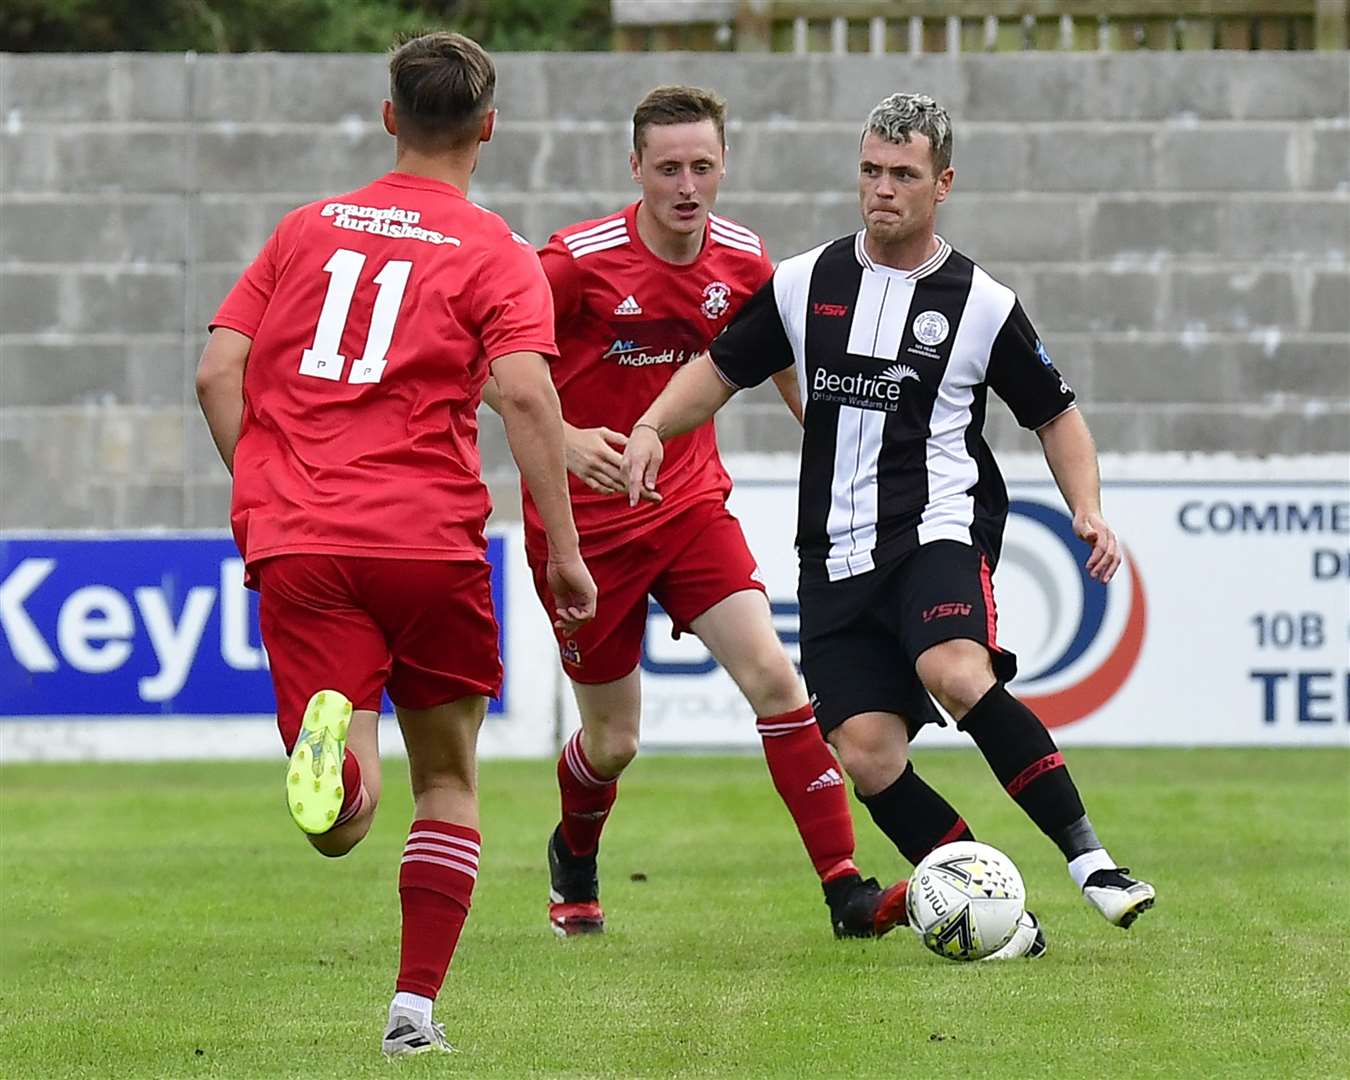 Wick Academy goalscorer Gordon MacNab looking to pick out a pass during the game at Lossiemouth. Picture: Mel Roger